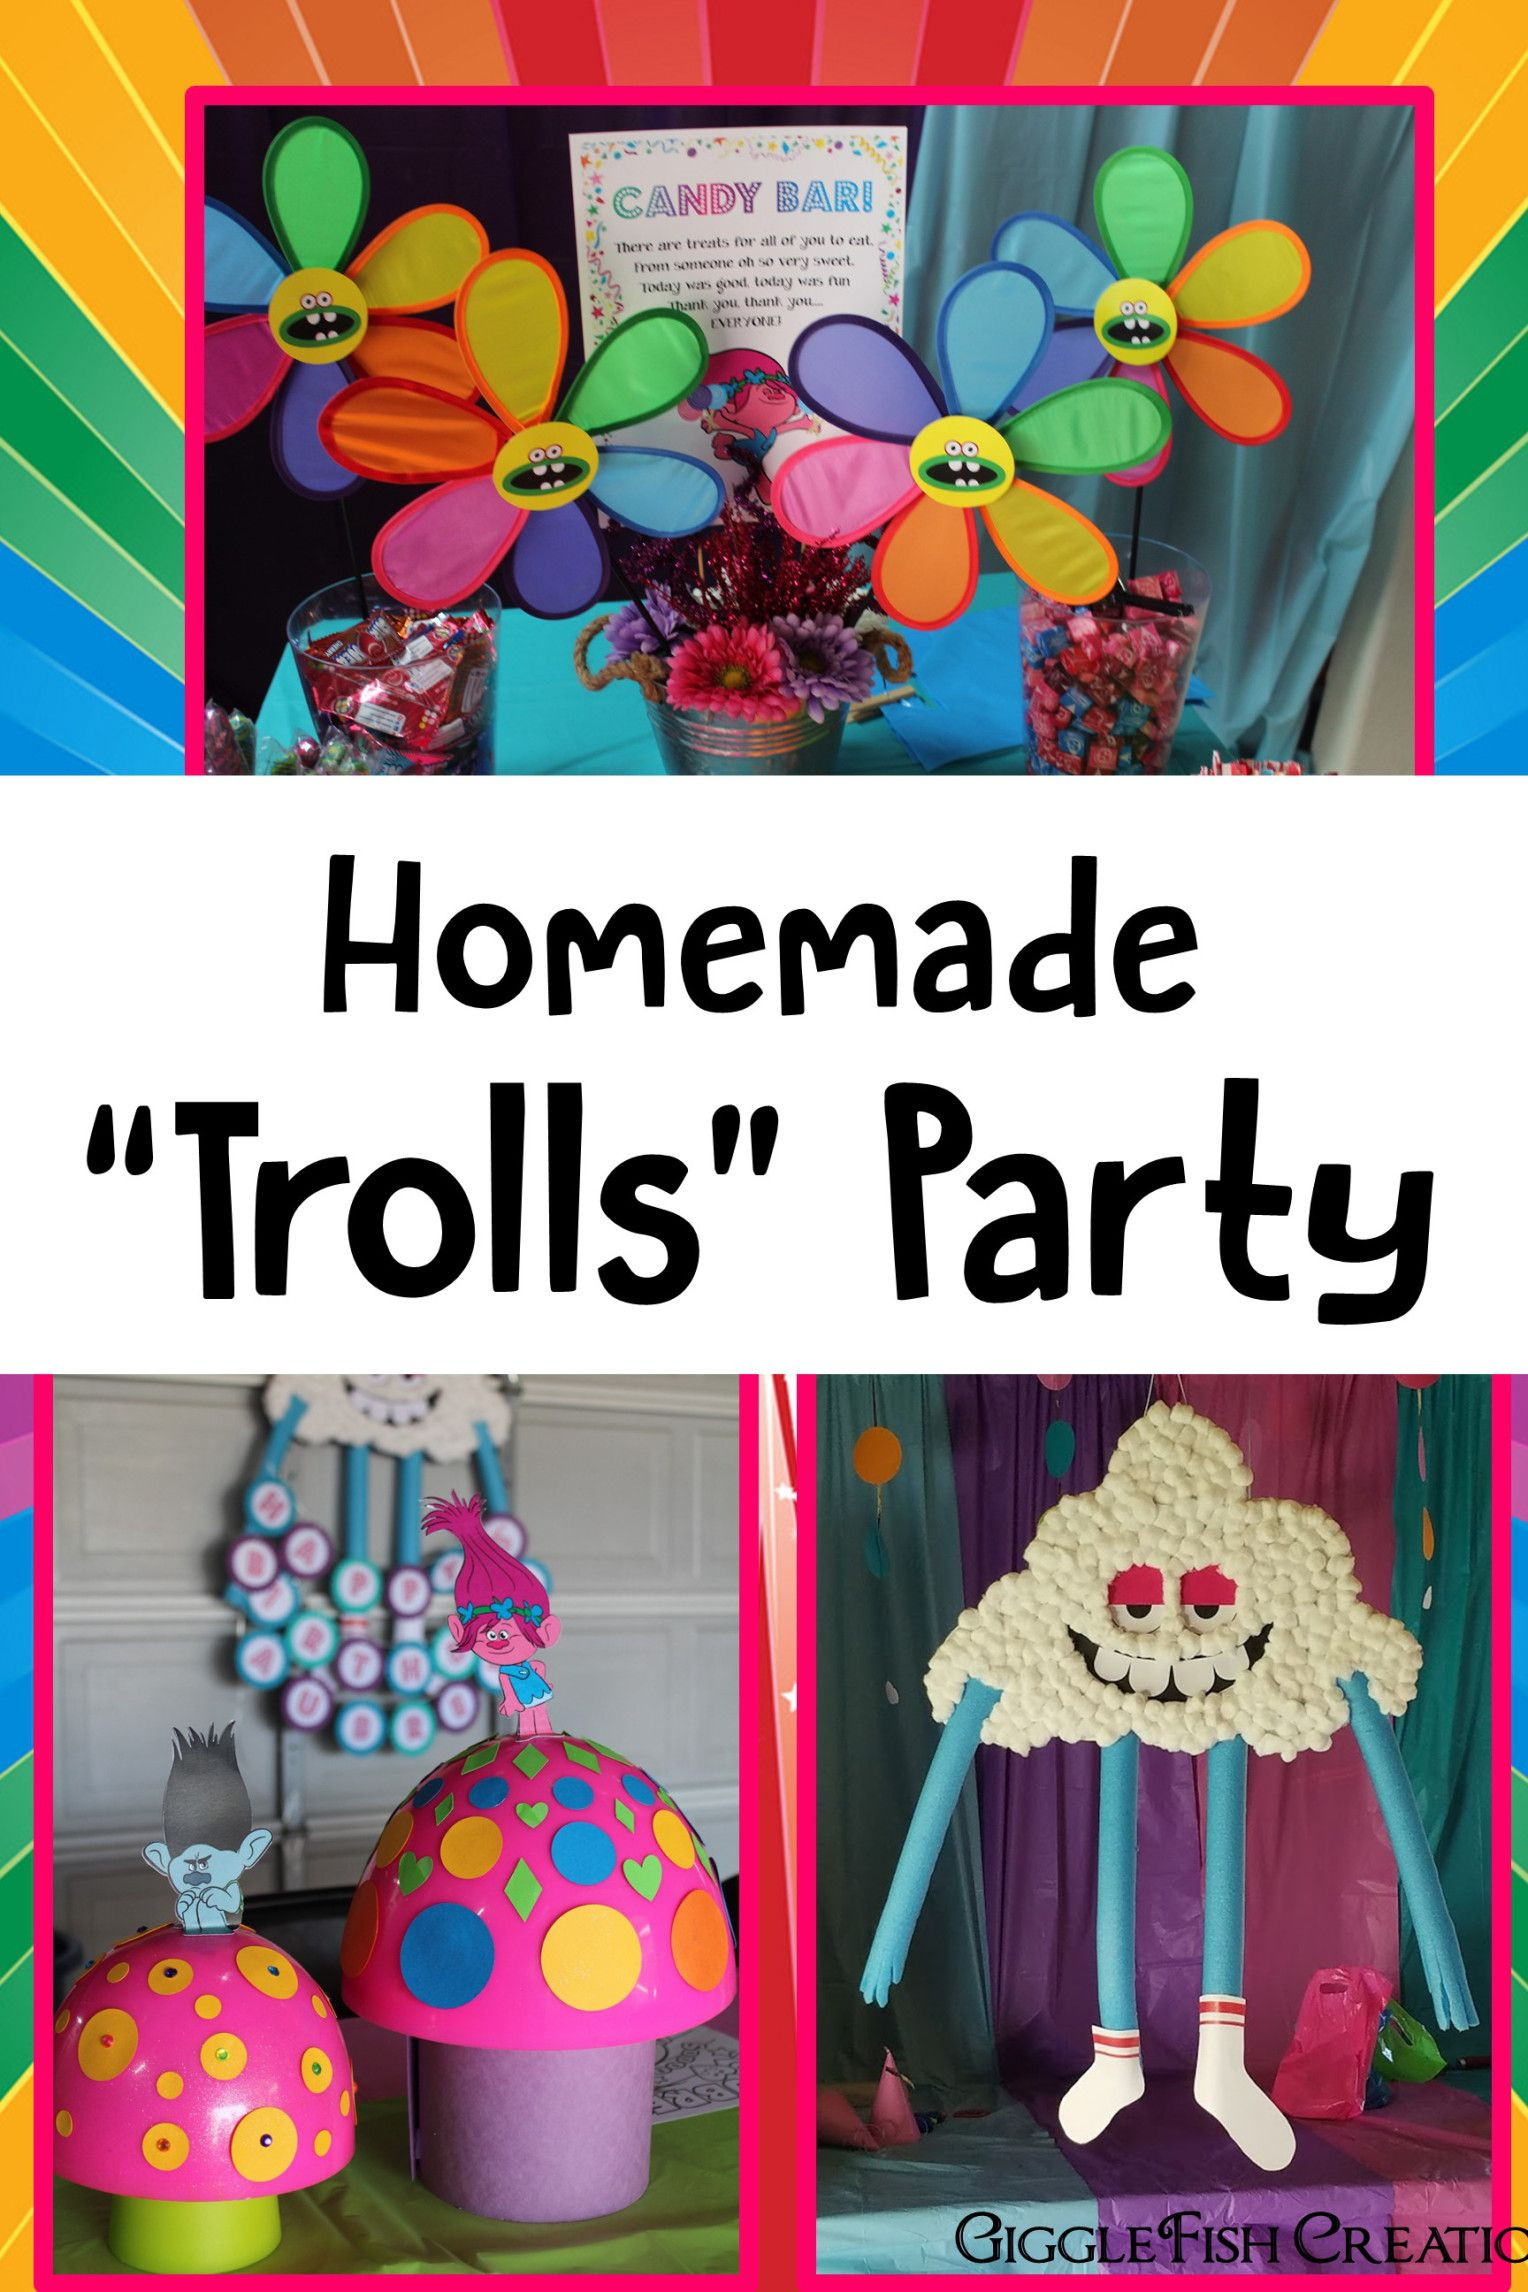 Trolls Pool Birthday Party Ideas
 Pin on Candy Shop Party